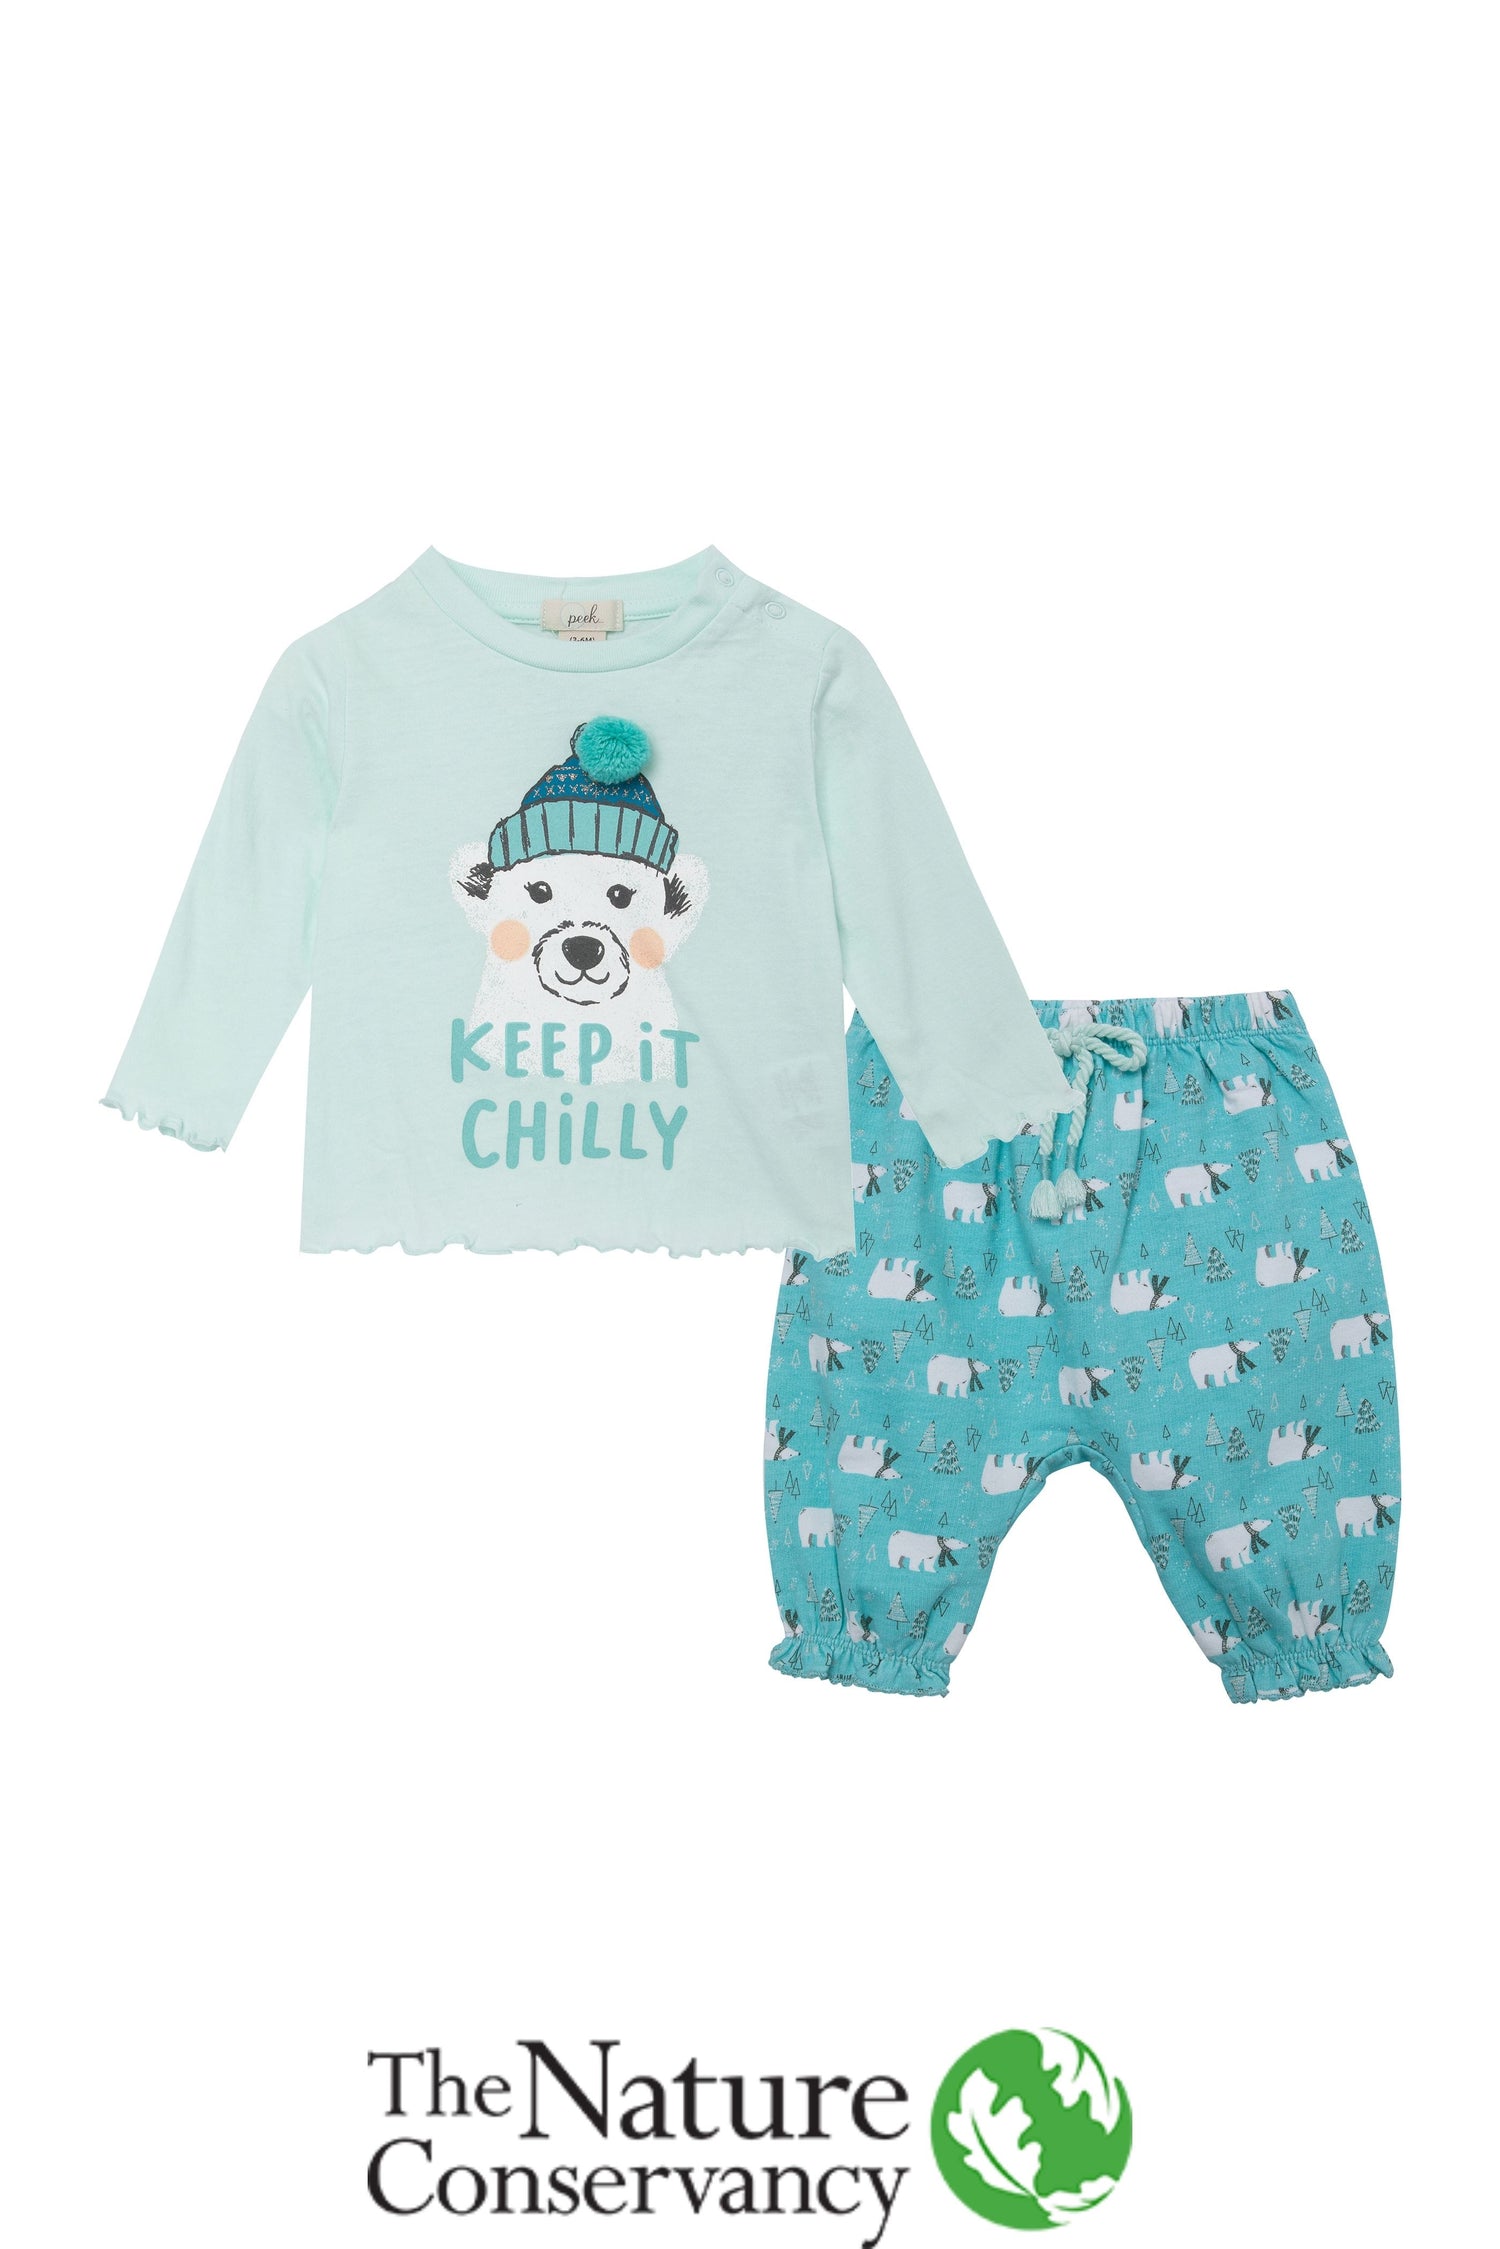 Front view of white and blue polar bear themed shirt and pant set with "keep it chilly" written